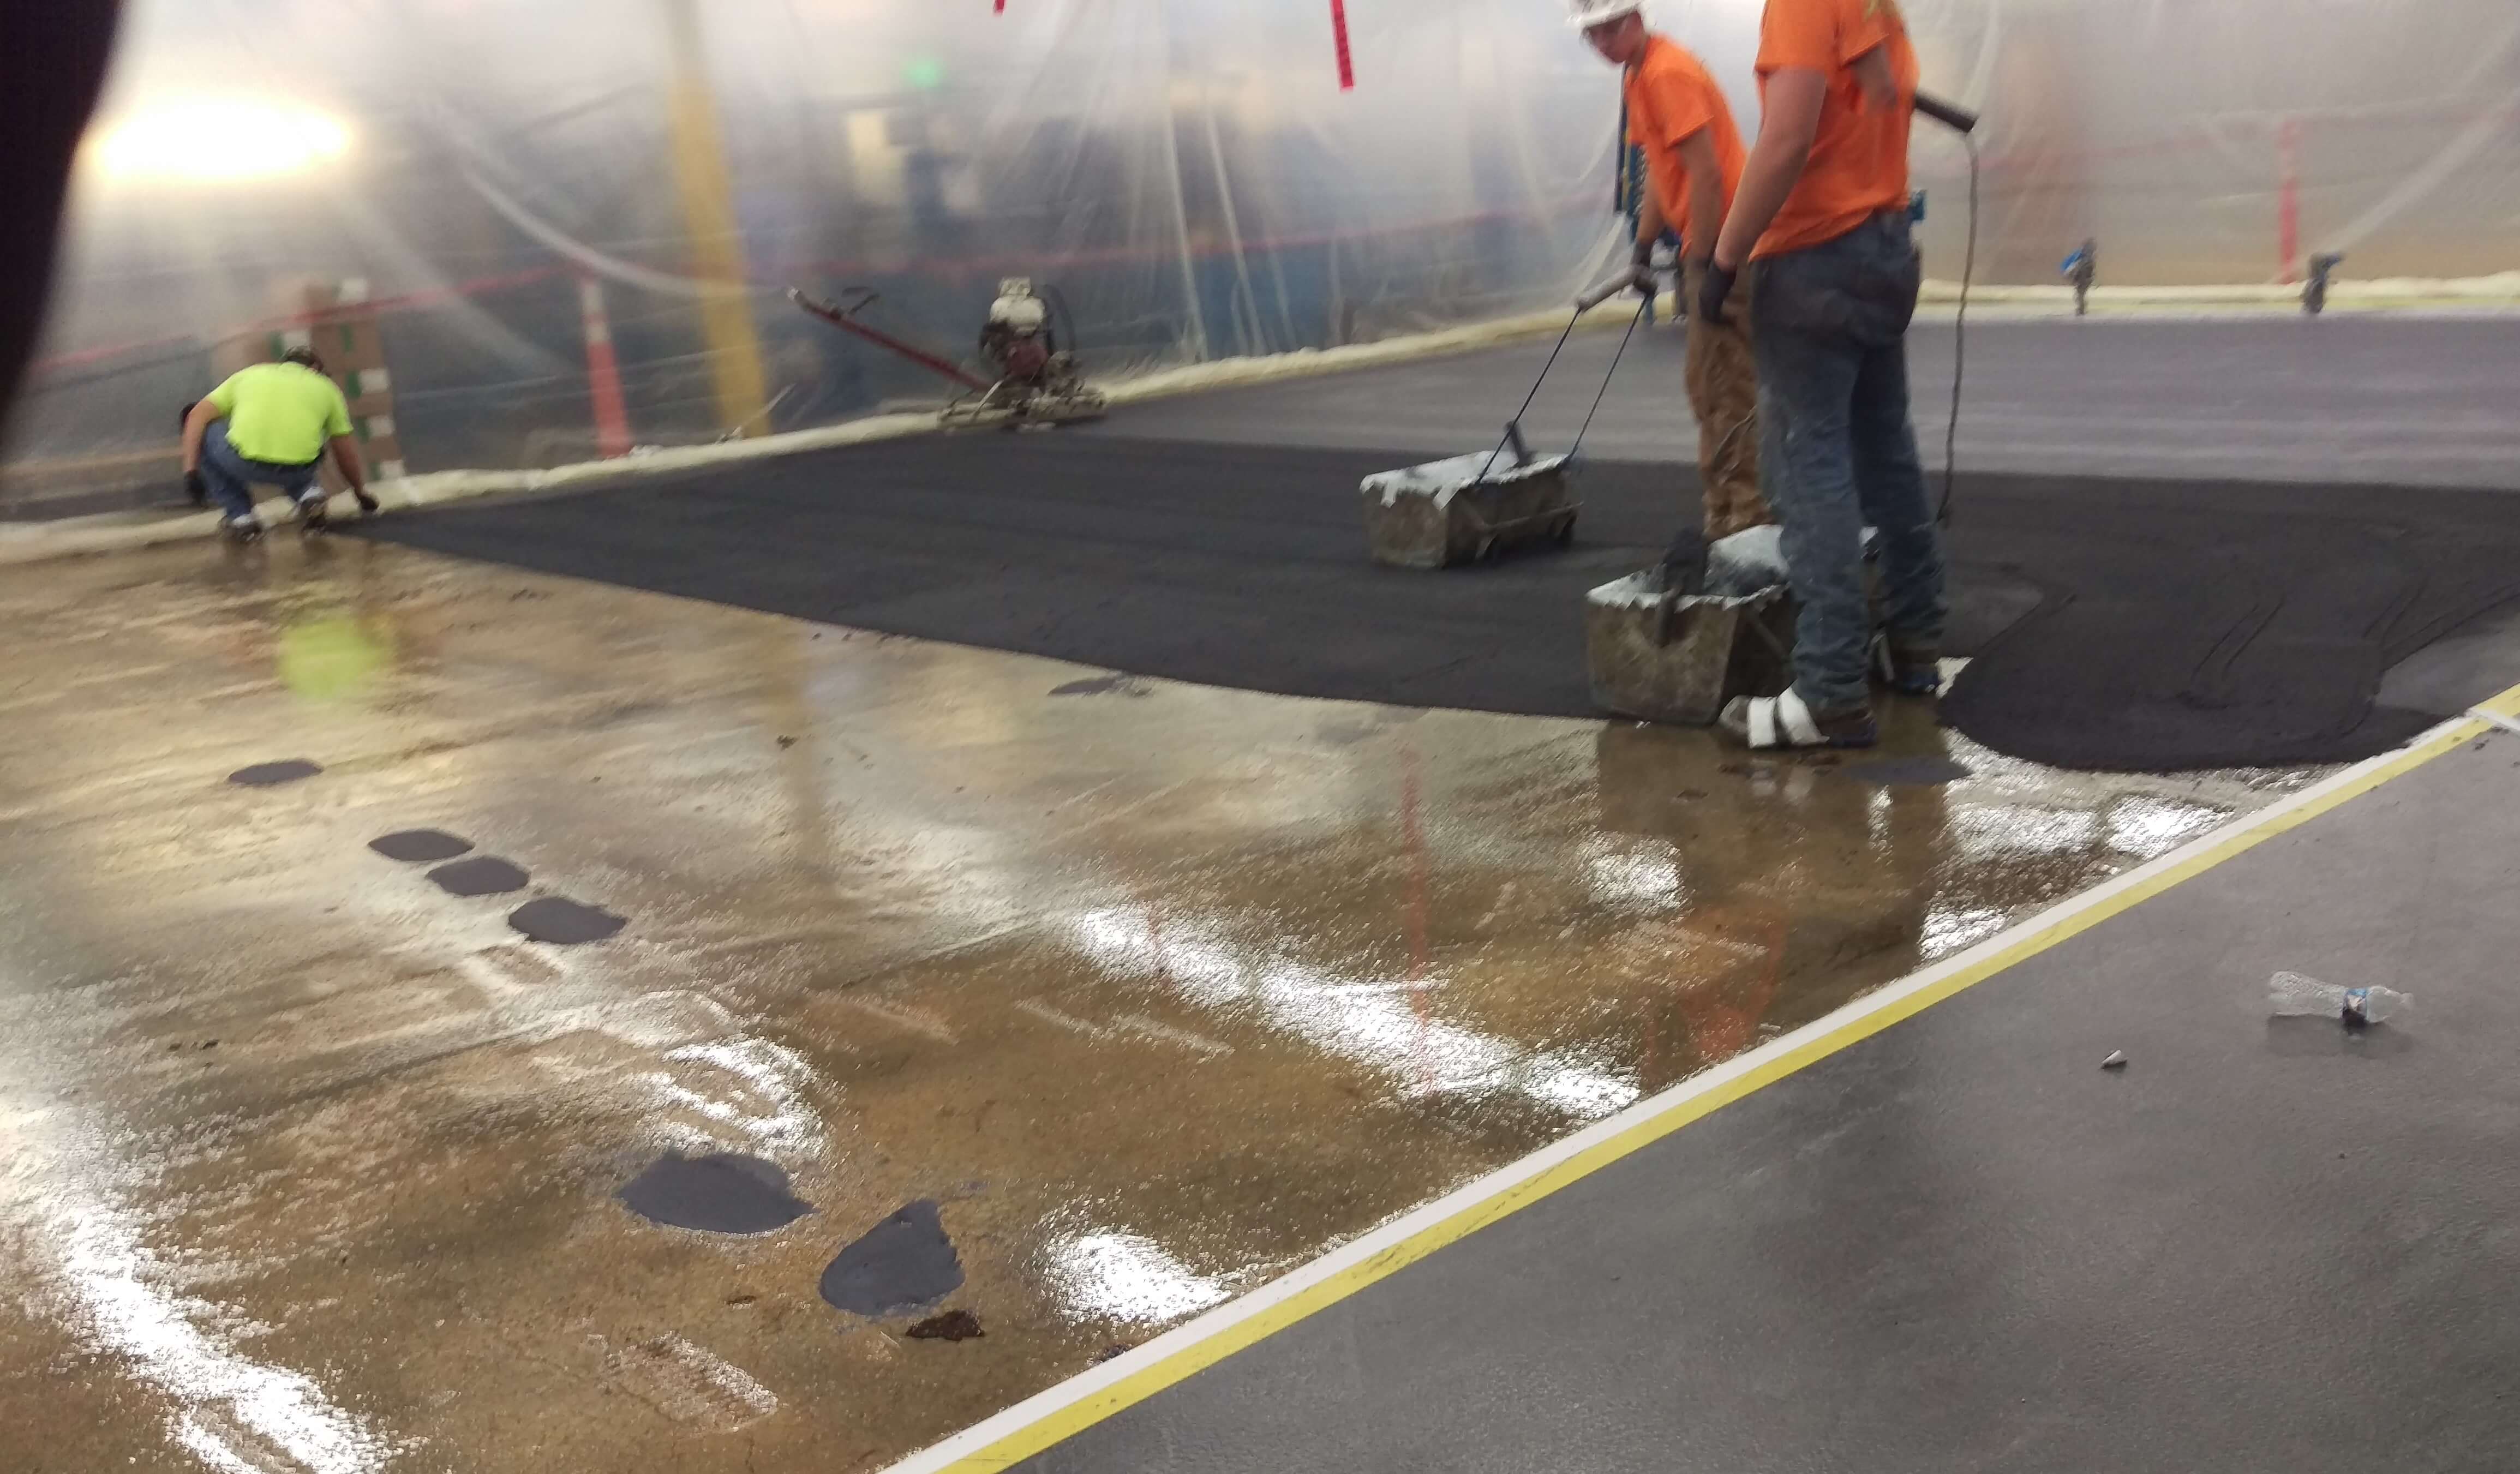 Extreme Abrasion Resistant Concrete/Coatings – Greenstone Polymer Systems